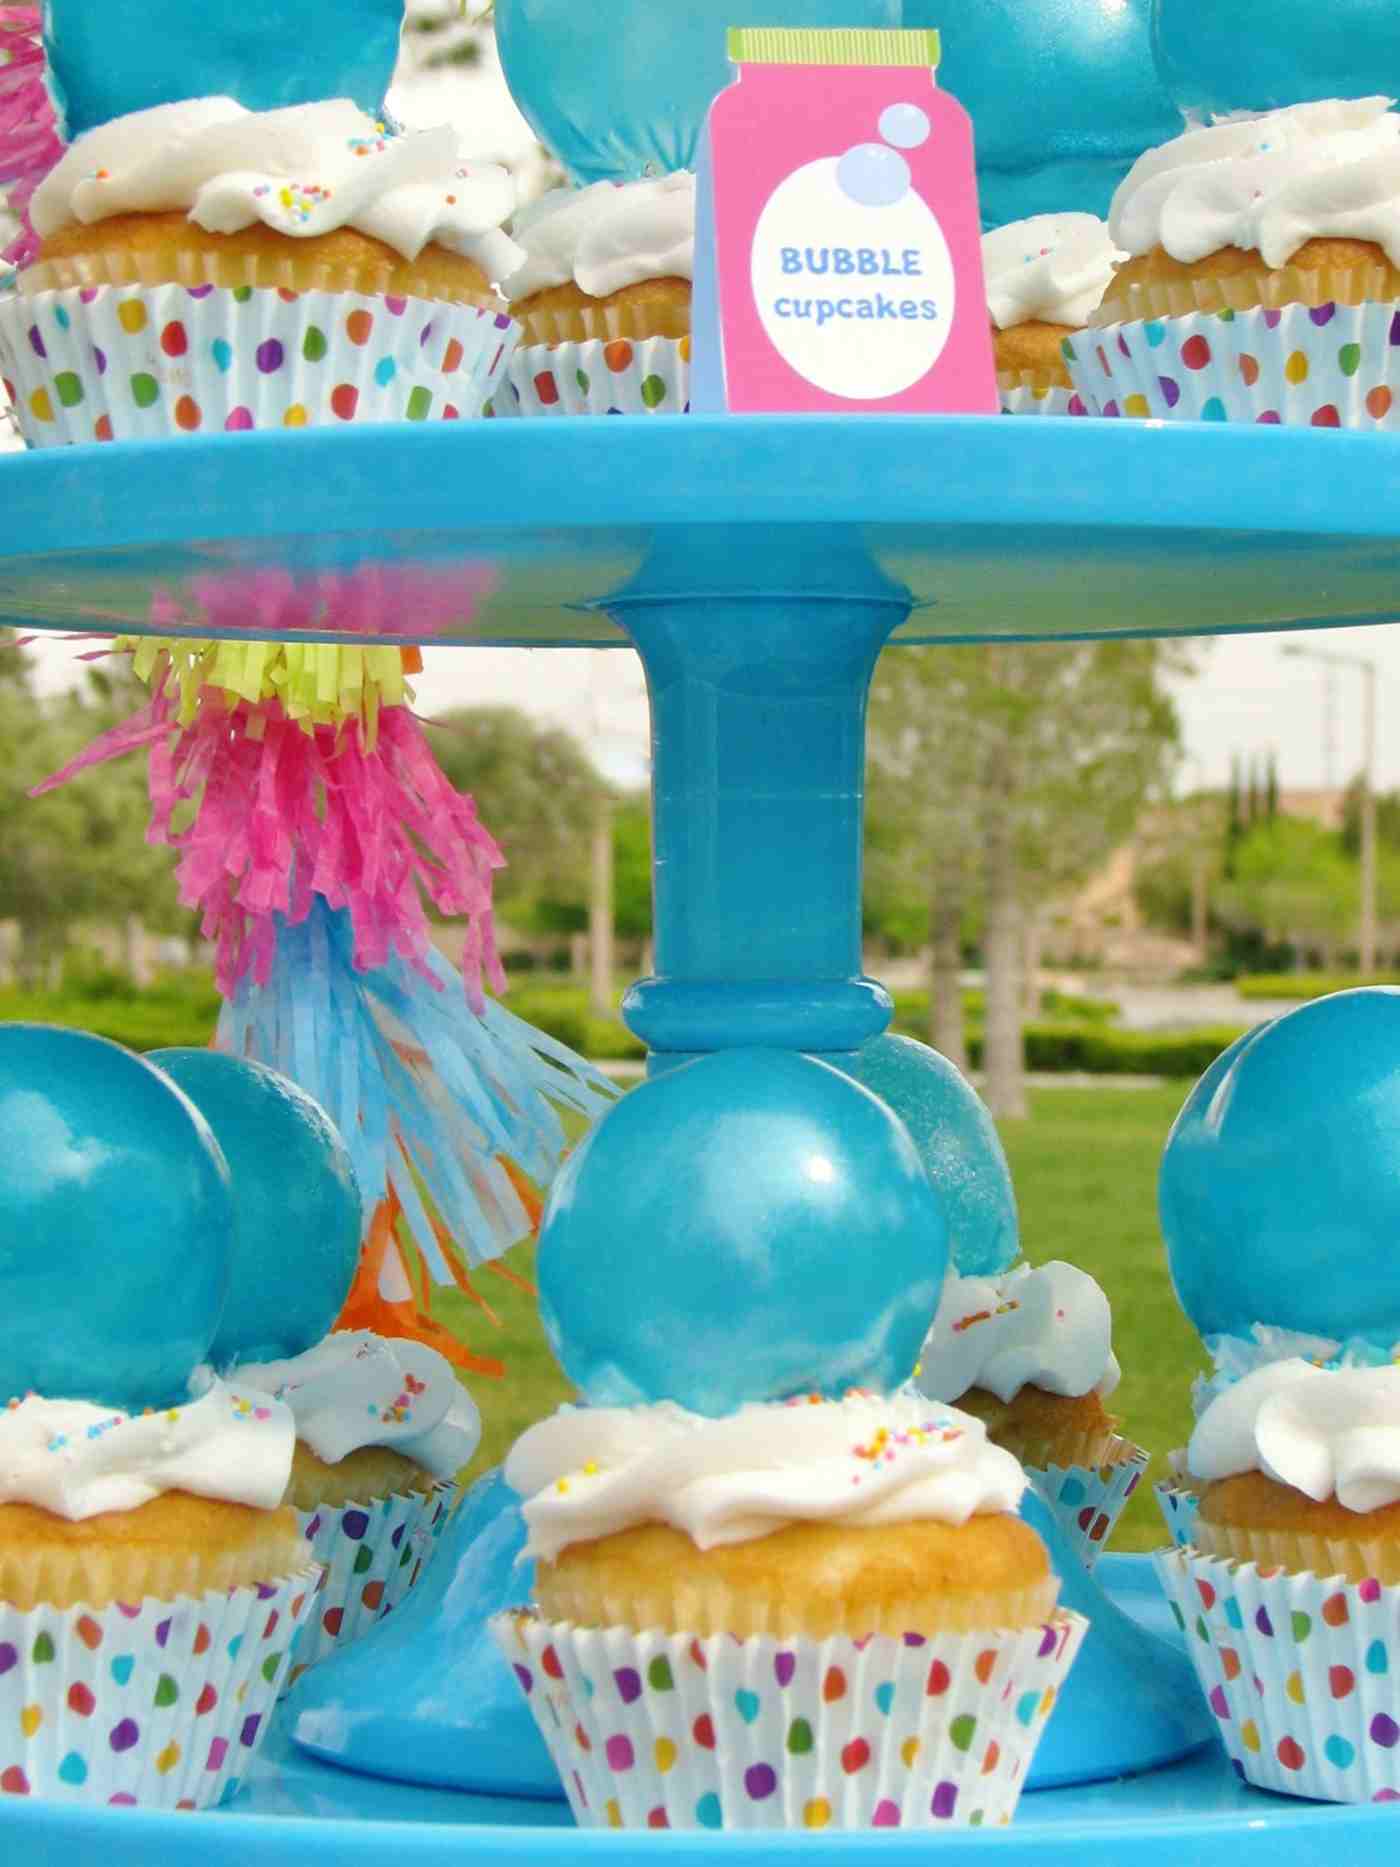 Blue bubbles and dotted objects decorate the cupcakes for a party